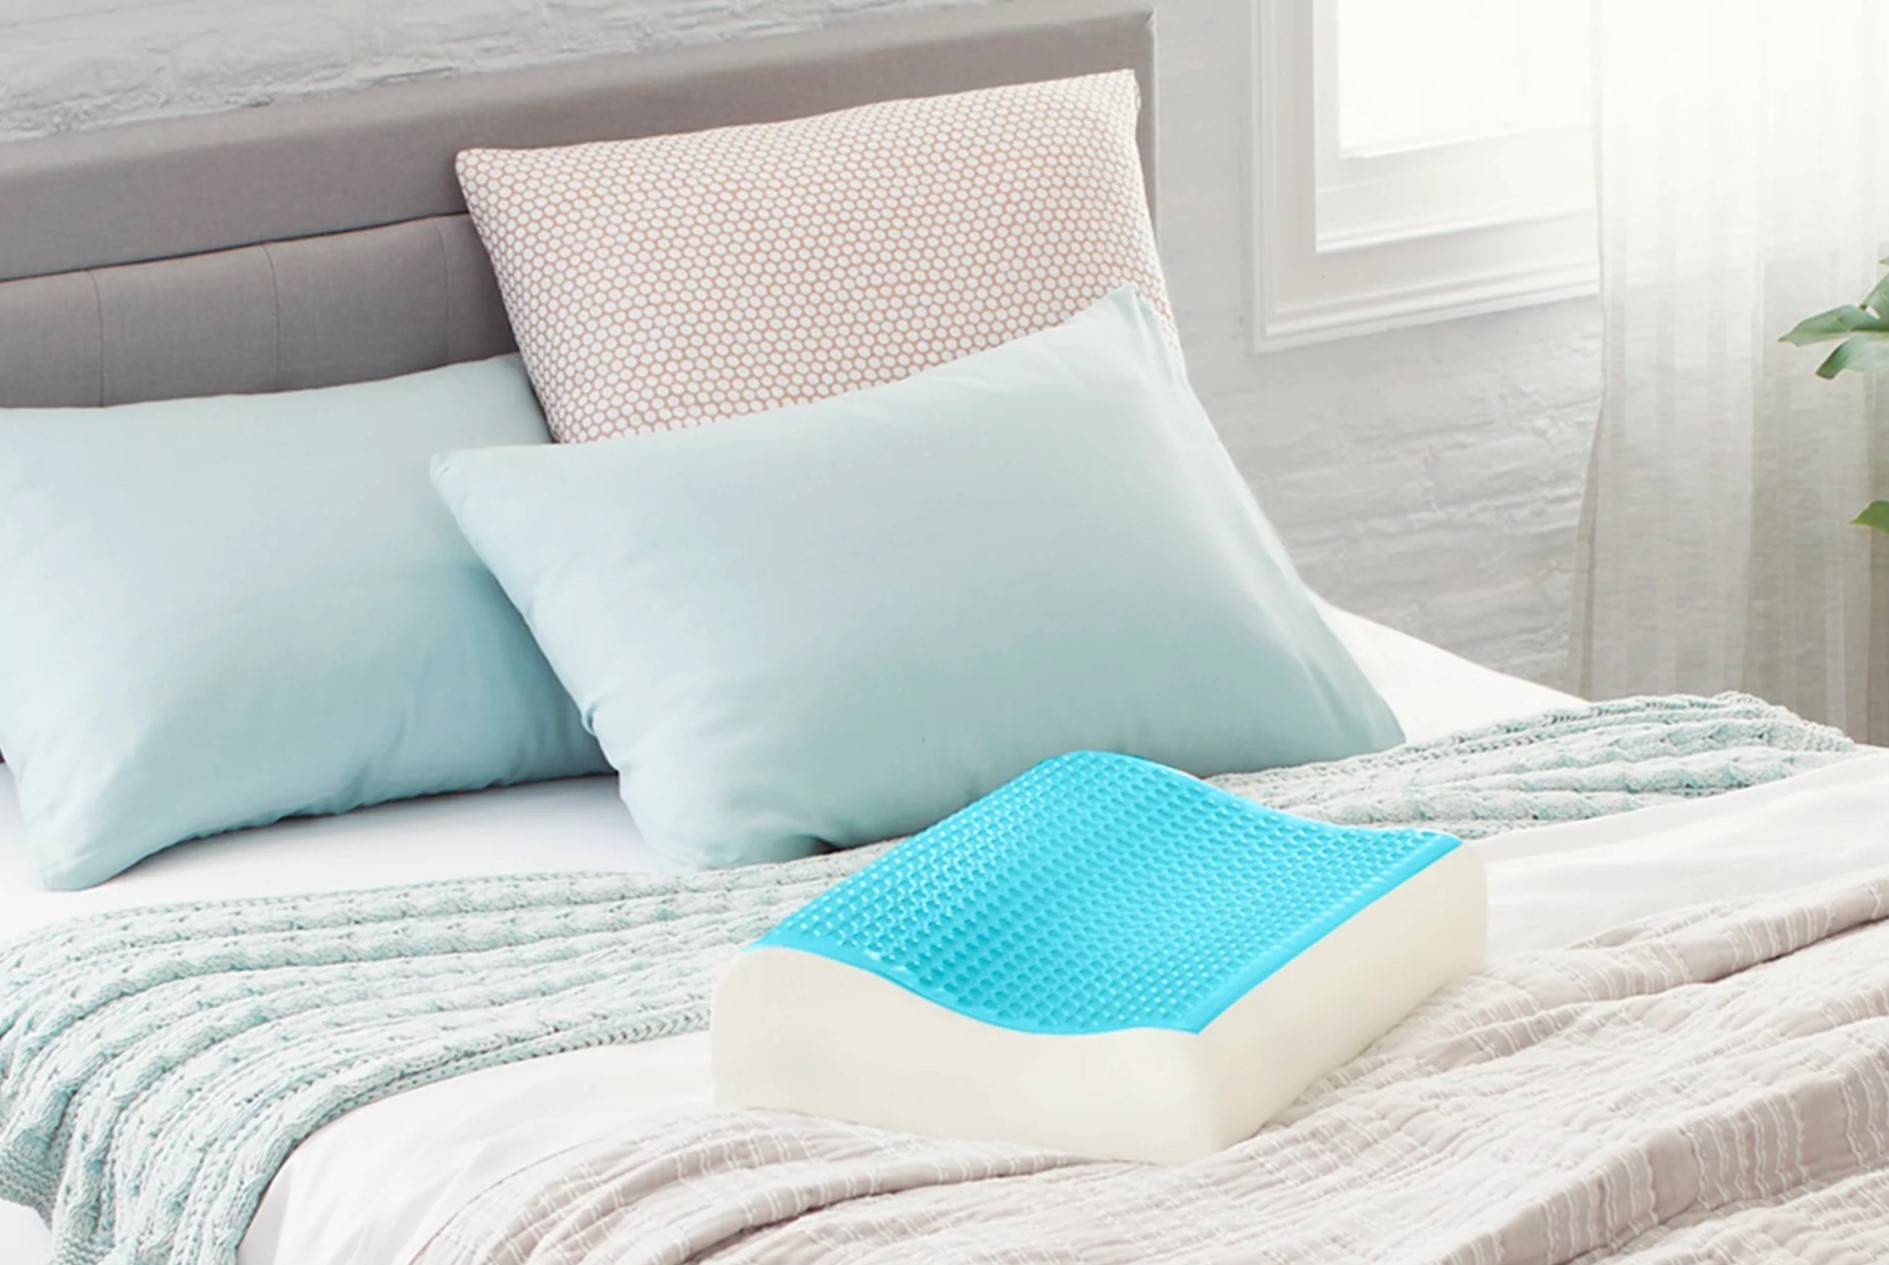 How To Clean A Memory Foam Pillow With Cooling Gel